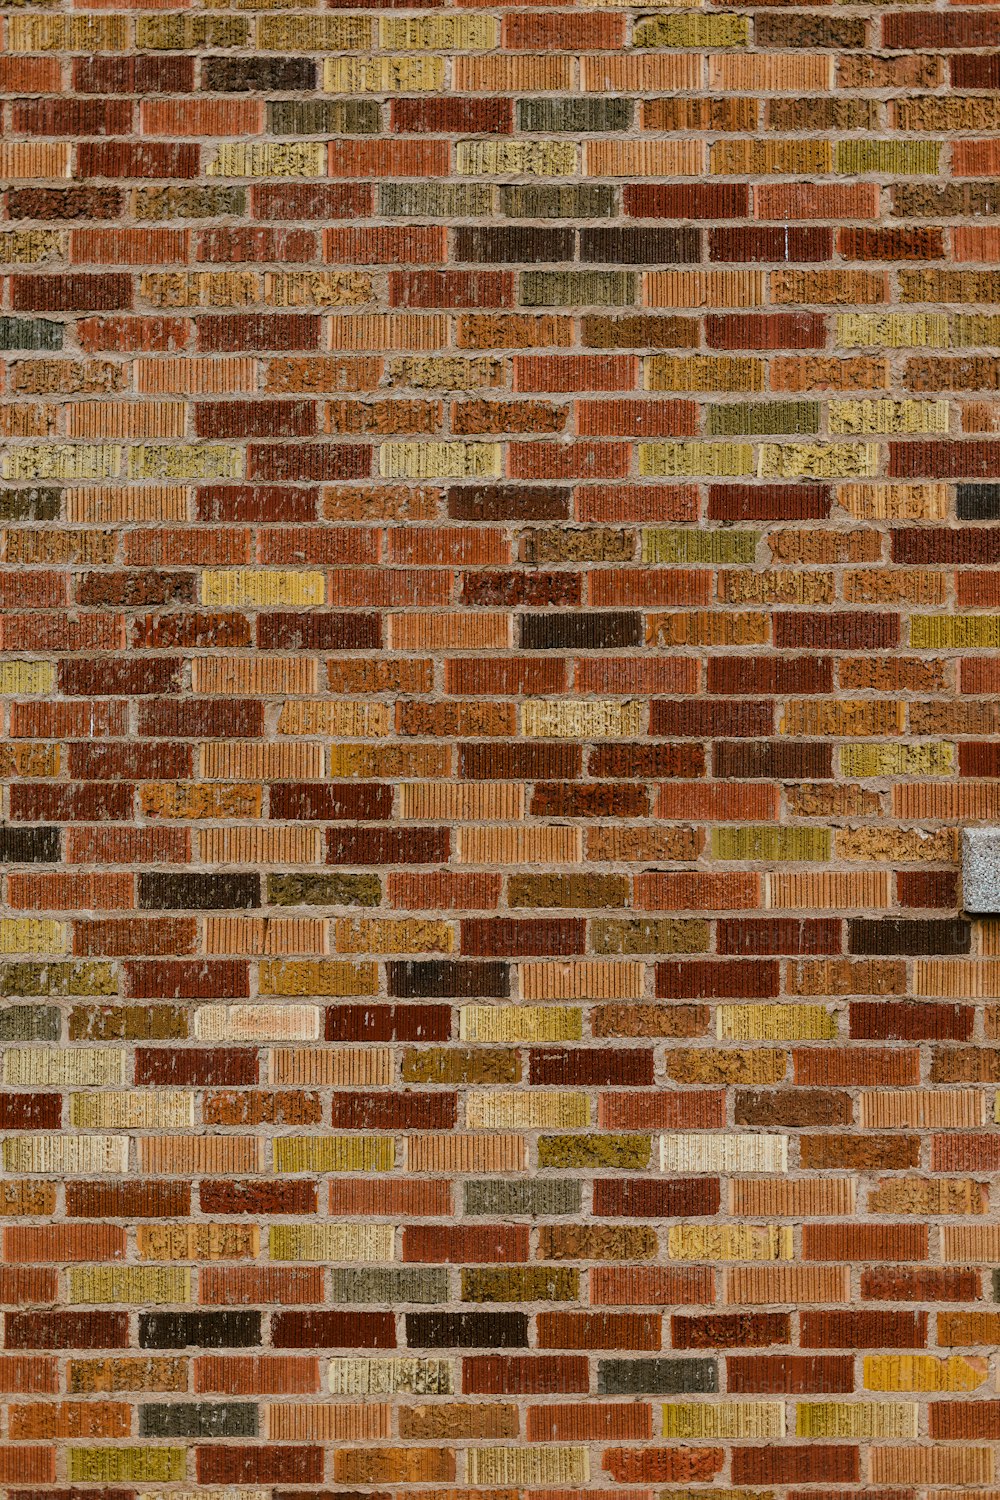 a brick wall with a clock on the side of it